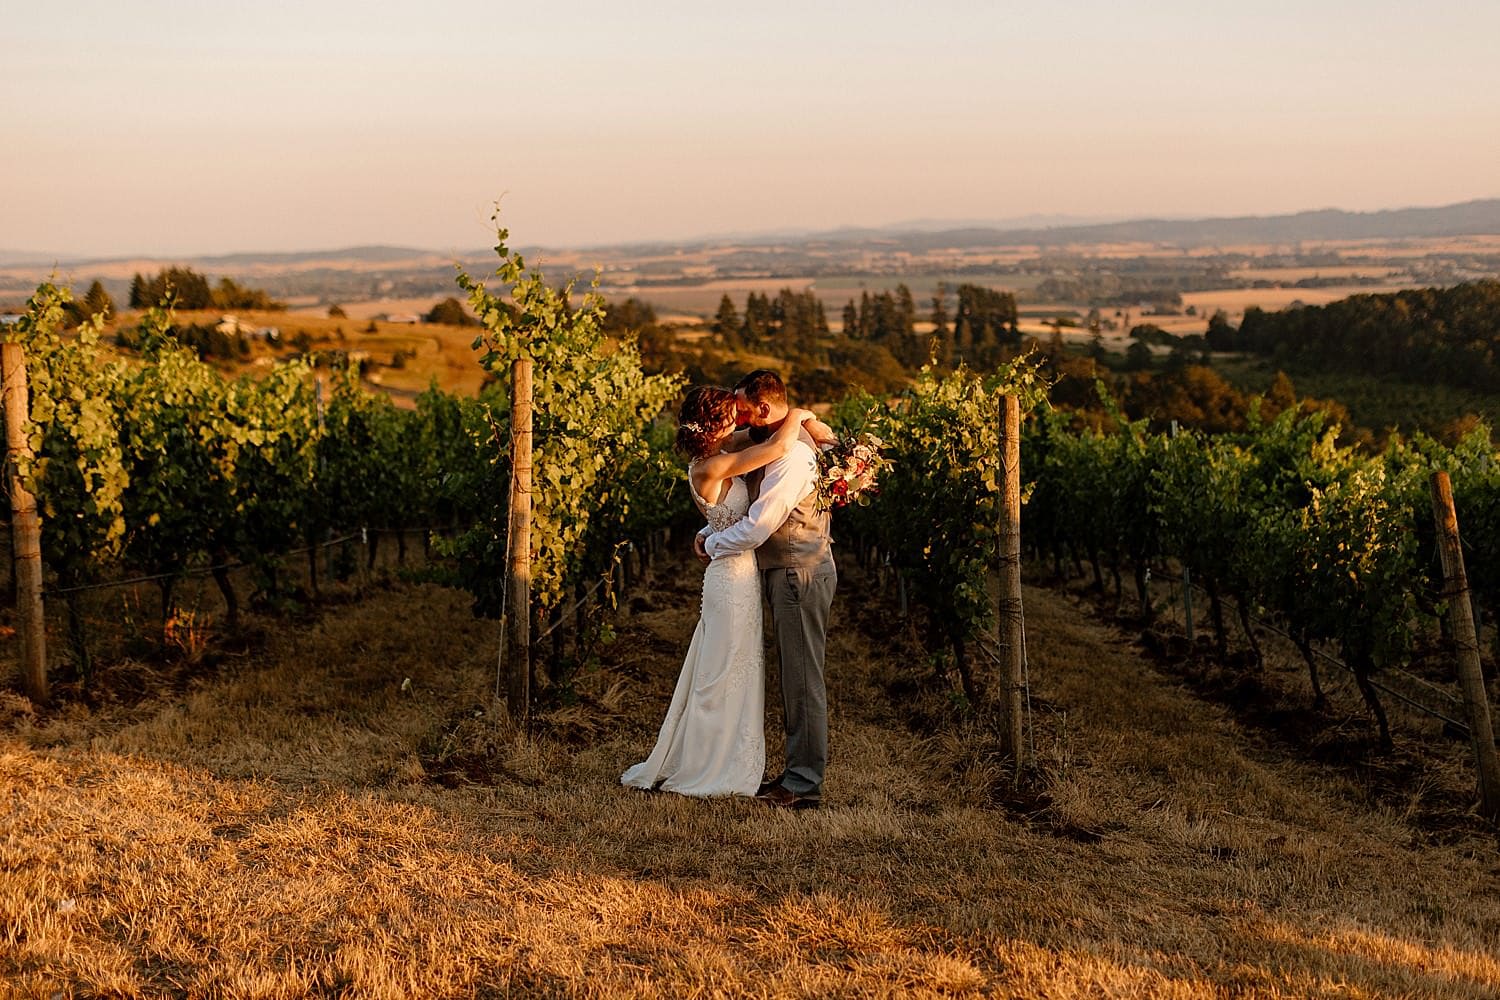 A bride and groom taking sunset portraits at their Maysara winery wedding.